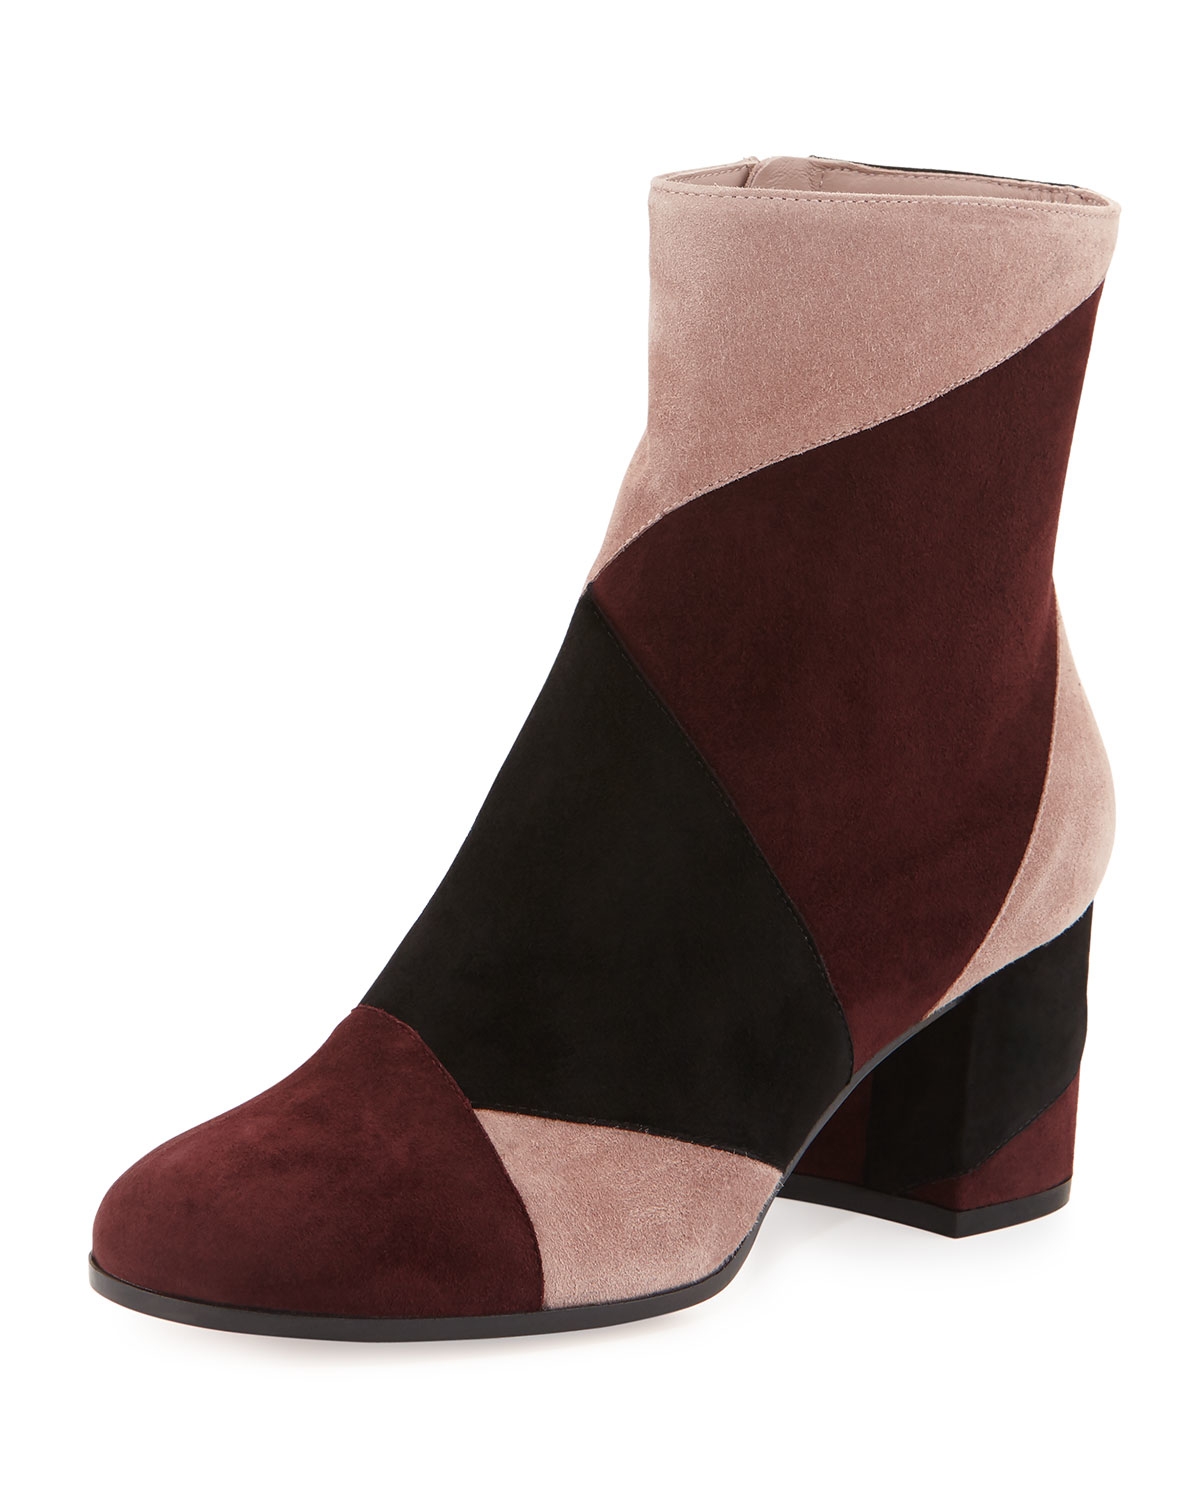 Lyst - Gianvito Rossi Patchwork Suede Ankle Boot